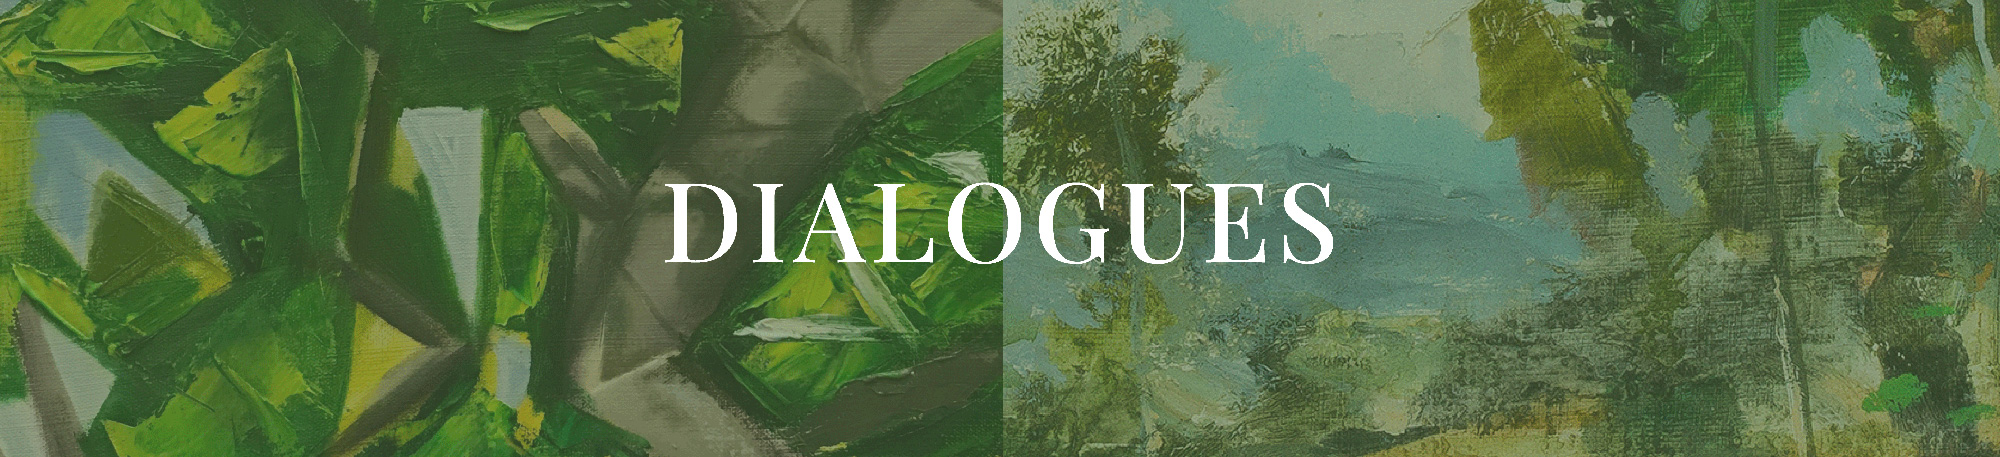 dialogues page header